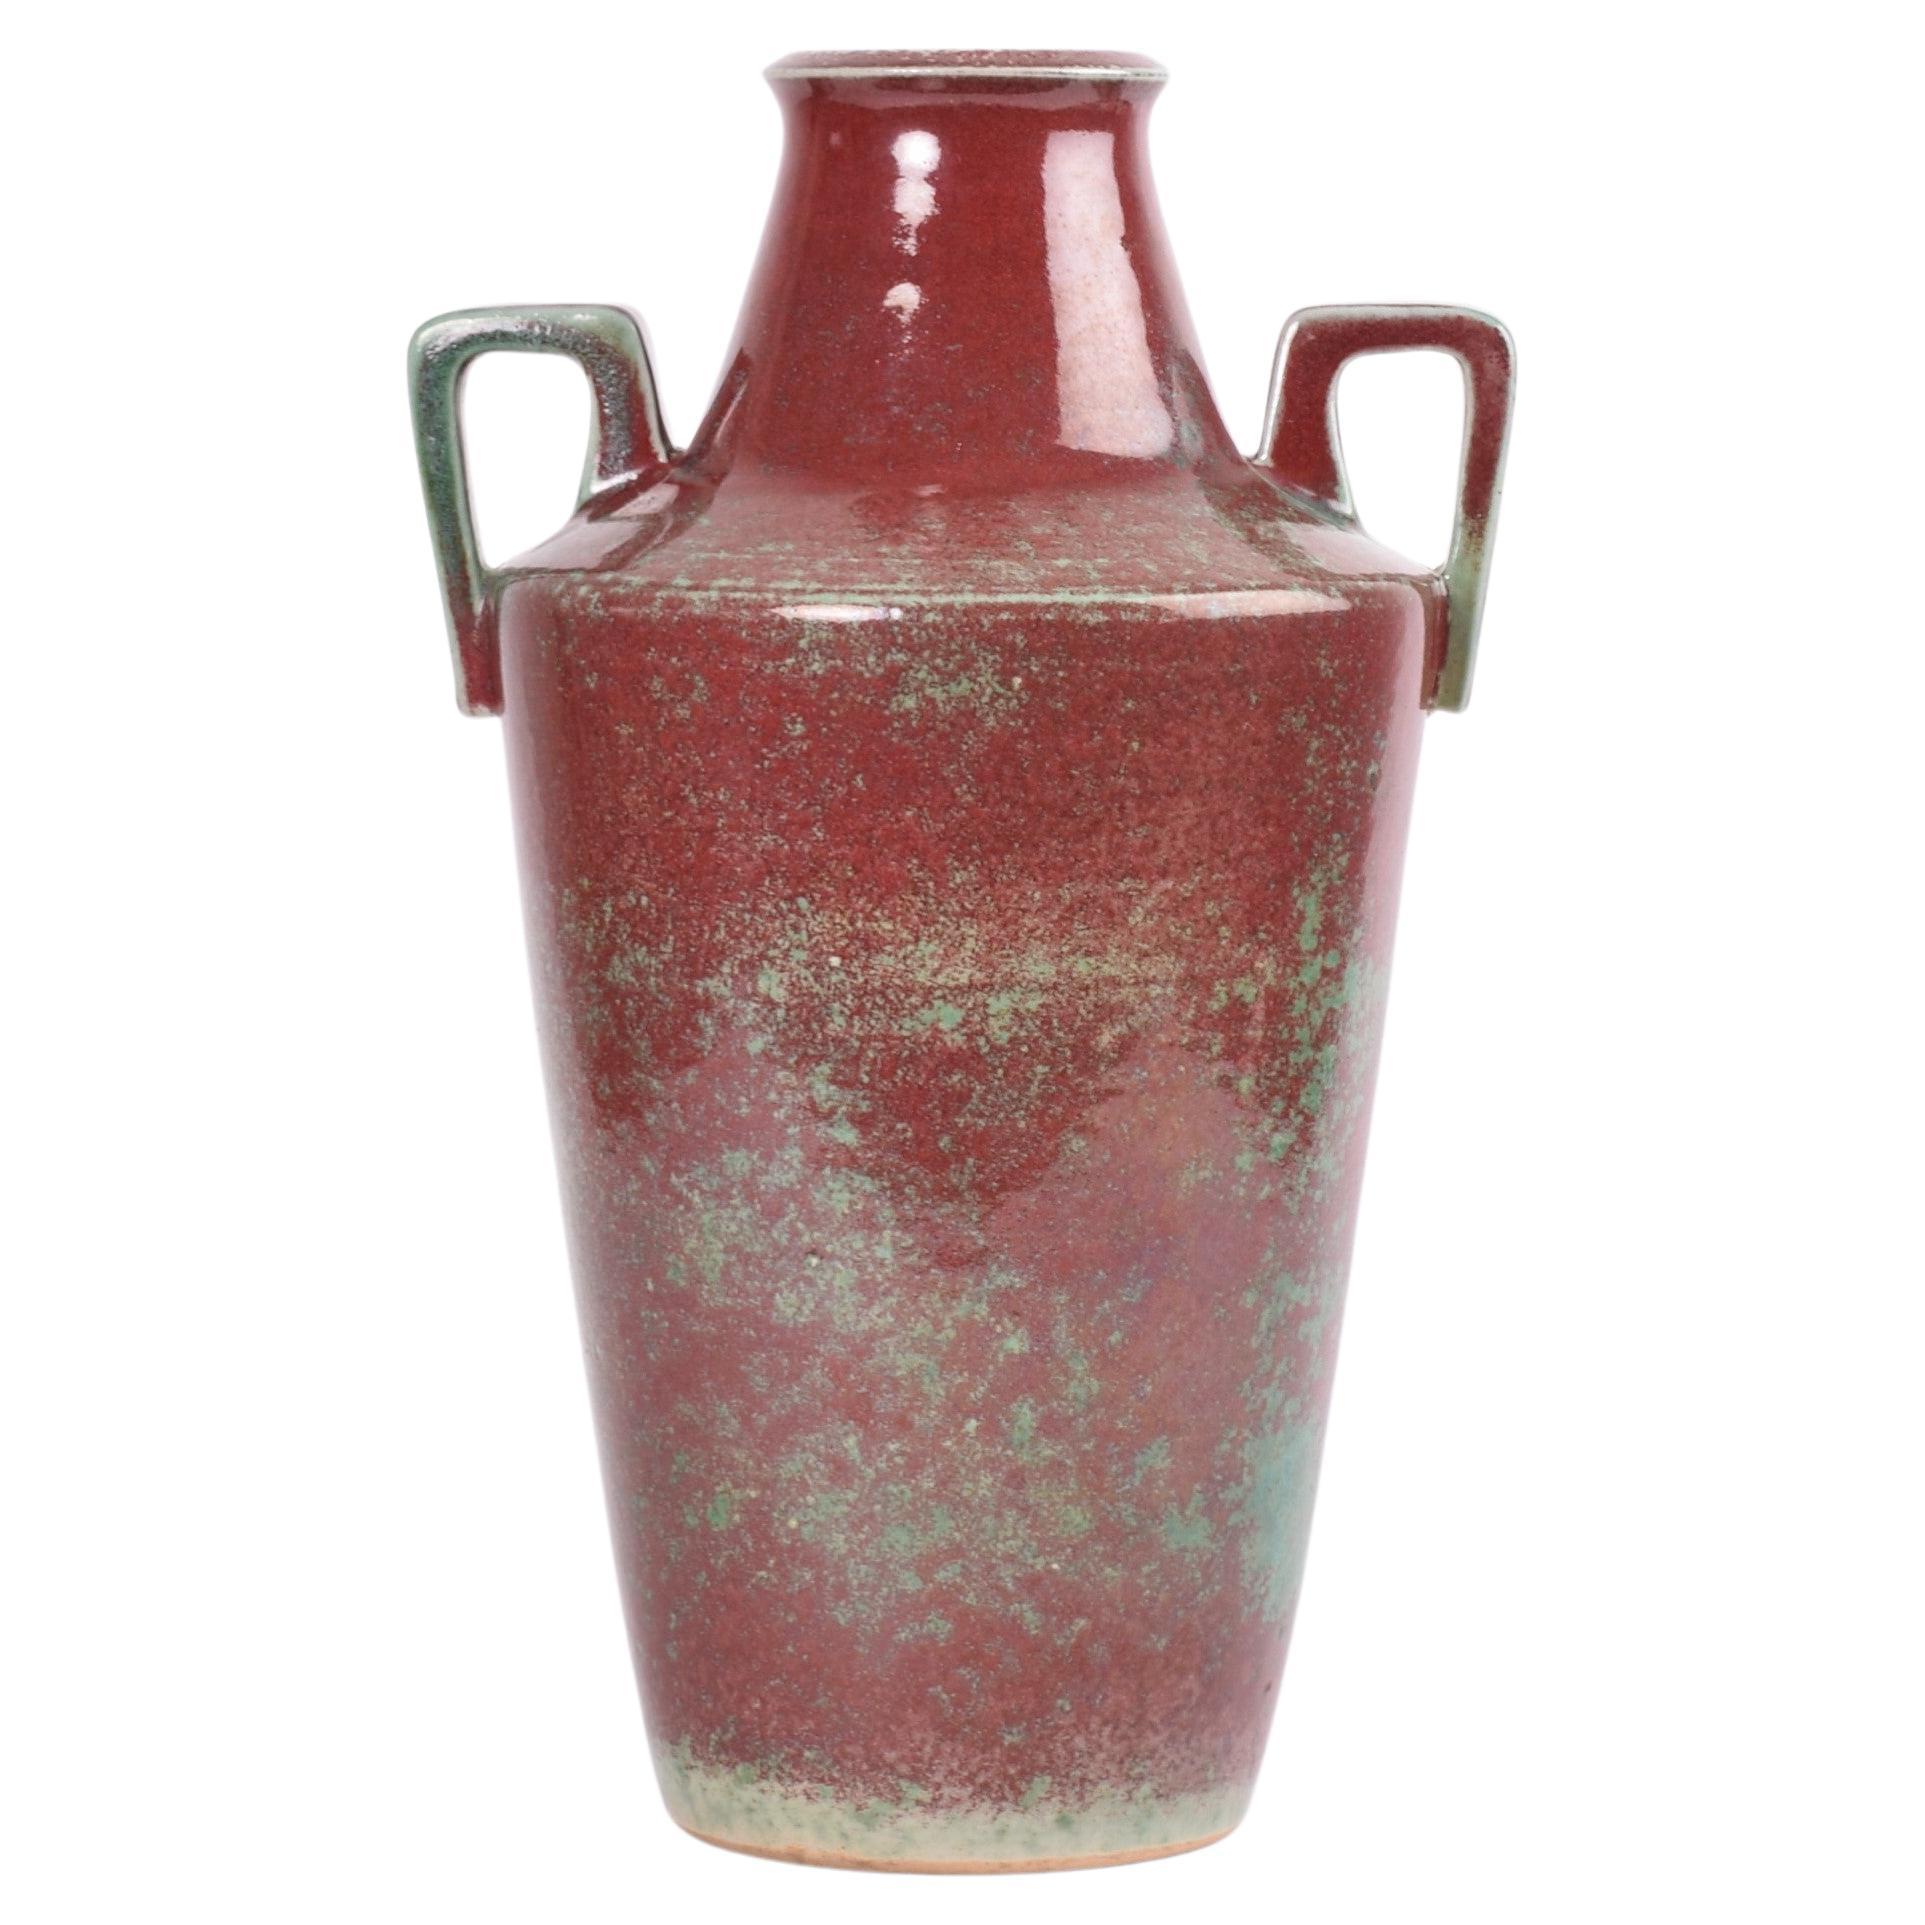 Unique Danish Art Deco handled vase from the acknowledged ceramic manufacturer Michael Andersen & Søn. Made ca 1920s to 30s.
The vase is covered with a oxblood red glaze with emerald green.

The vase is handsigned on bottom which indicates that